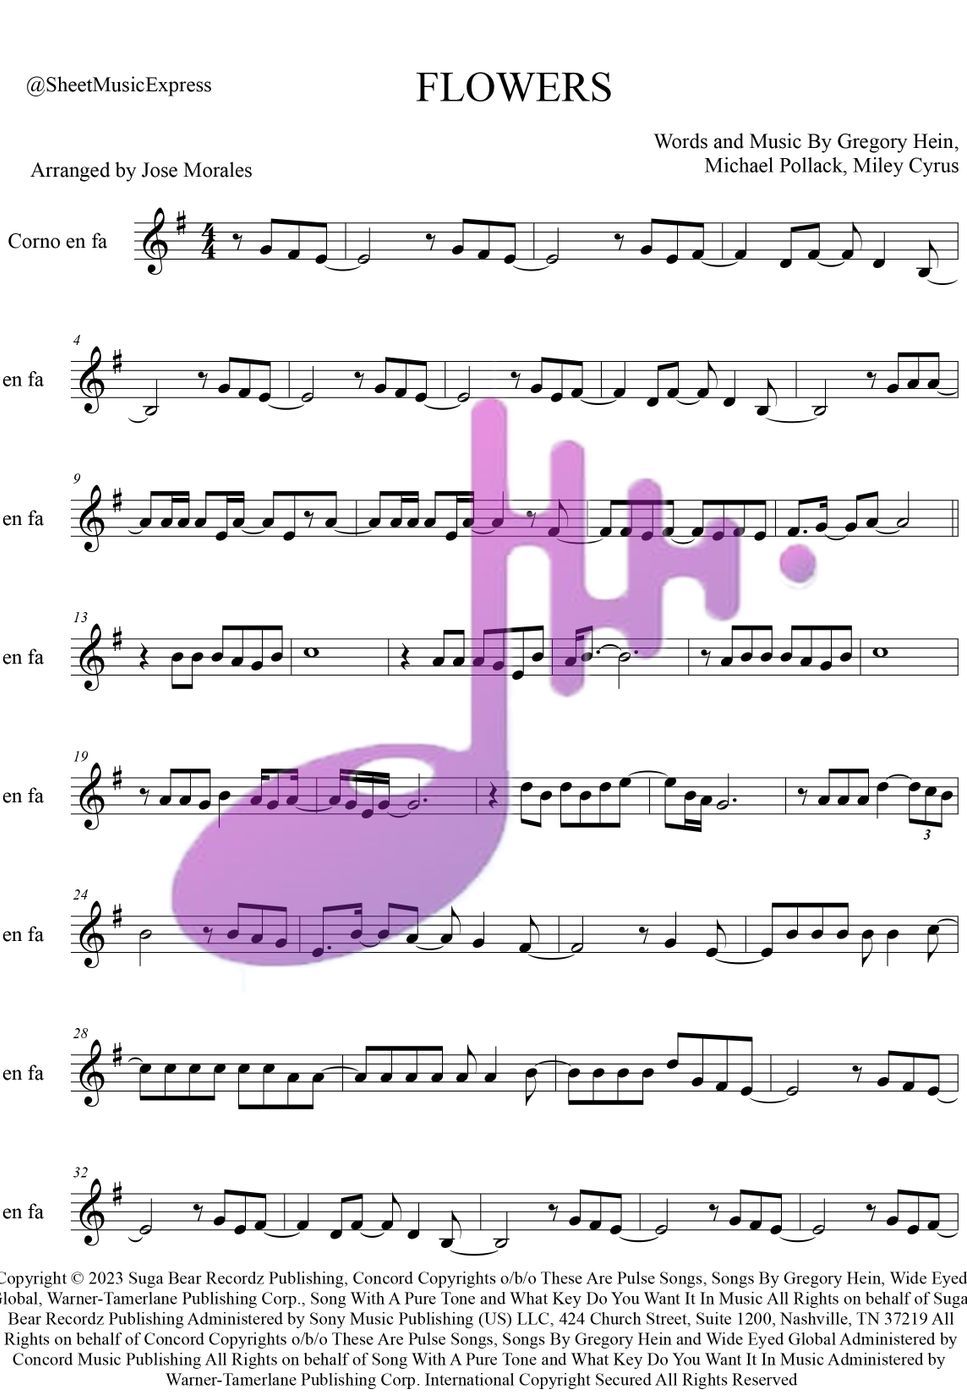 Miley Cyrus - Flowers - Miley Cyrus Horn in F (Pop) by Sheet Music Express